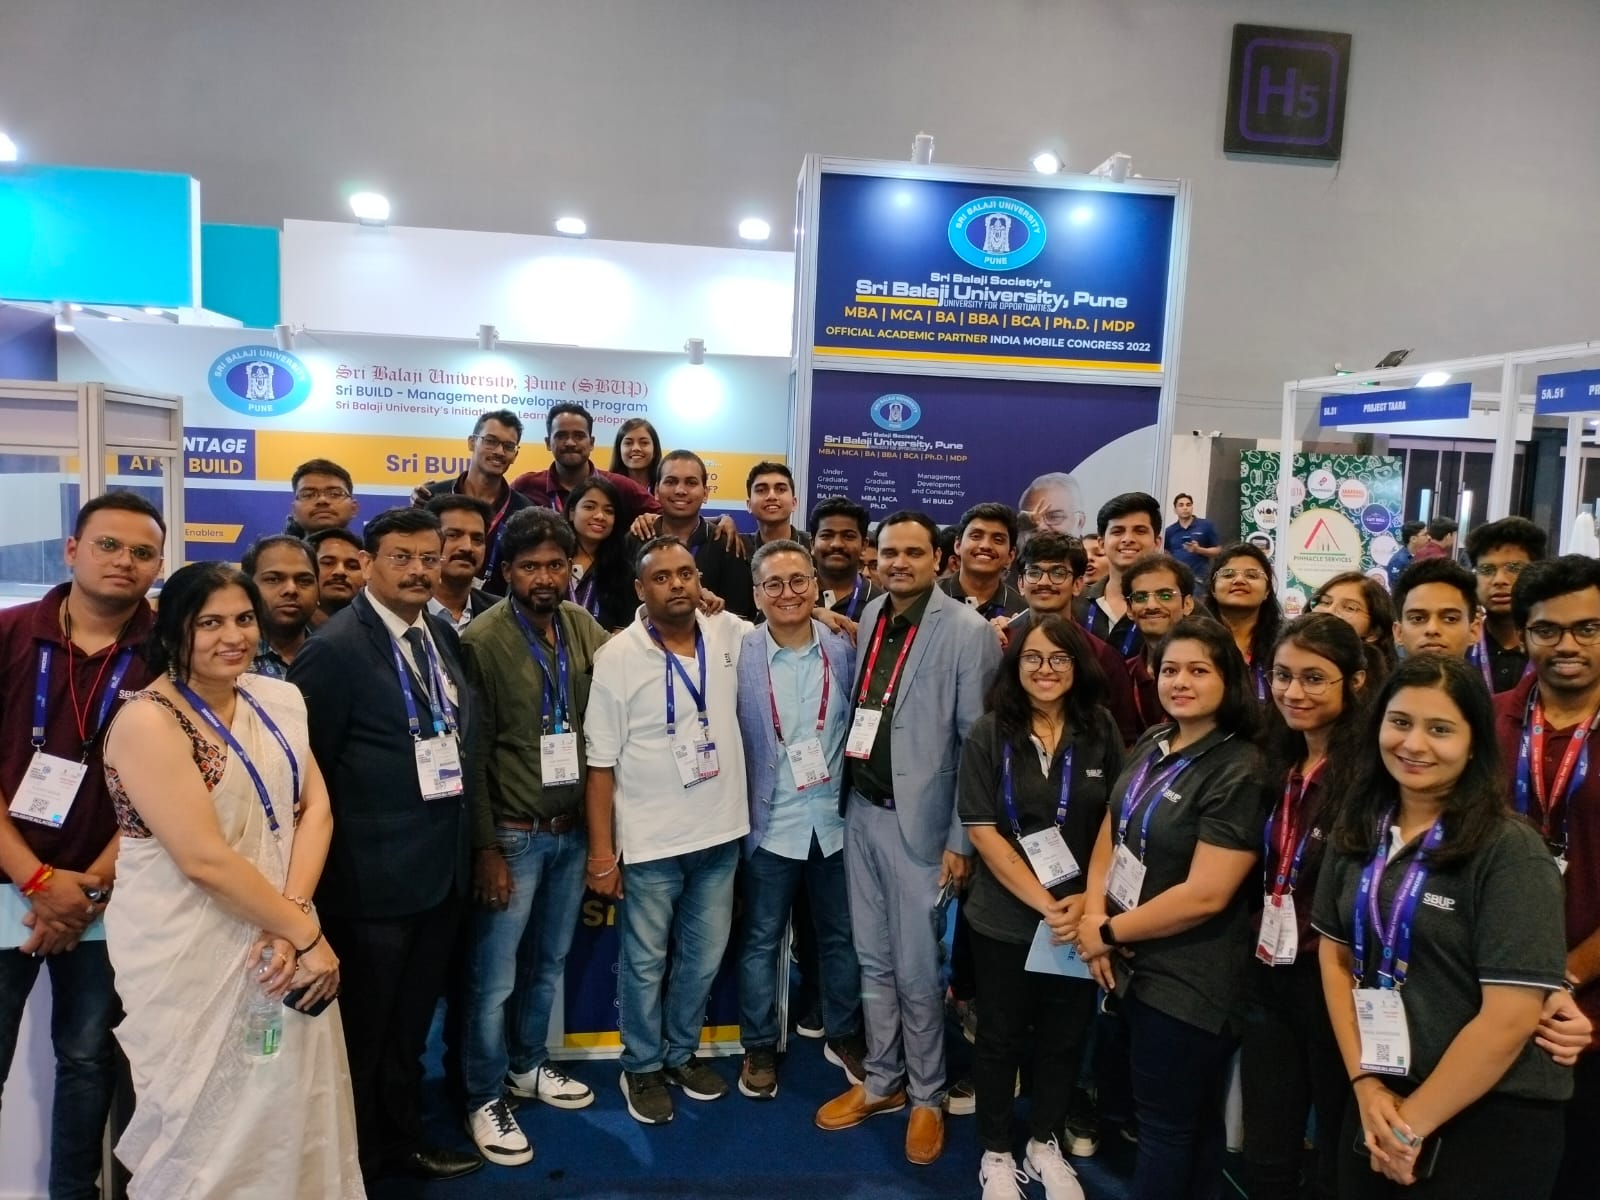 Sri Balaji University, Pune (SBUP) as the Official Academic Partner at #IMC2022. Seen here at the SBUP exhibition booth with MBA students, Faculty and Alumni